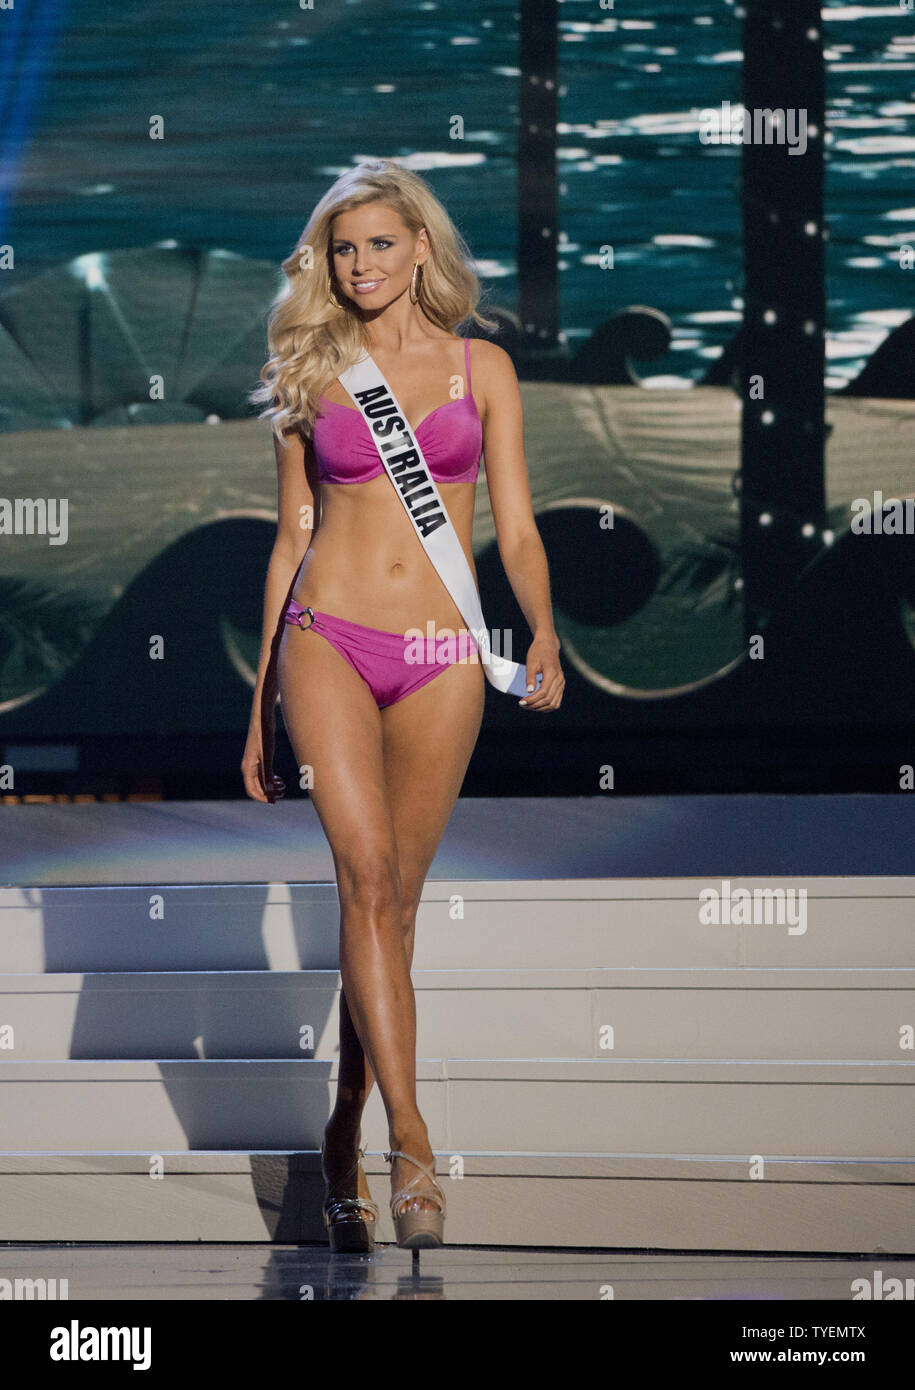 Miss Universe contestant Tegan Martin from Australia competes during the bikini competition event at  U.S. Century Bank Arena, Florida International University in Miami, Florida on January 21, 2015. The 63rd. Miss Universe Pageant will be held in Miami, Florida, January 25, 2015. Photo by Gary I Rothstein/UPI Stock Photo